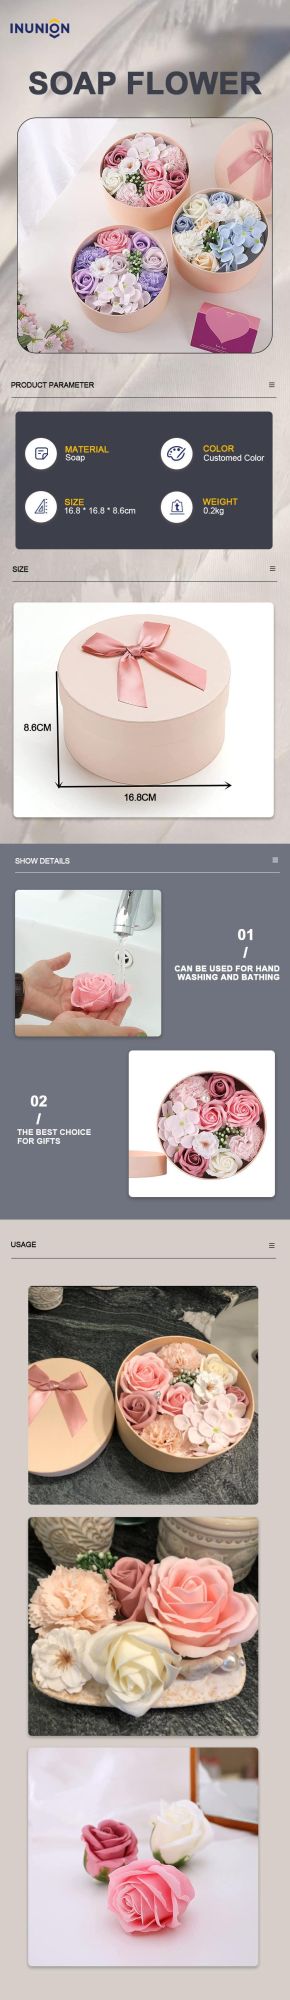 Artificial Rose Flower Soap Roses Gift Box for Valentine′s Day, Mother′s Day, Christmas